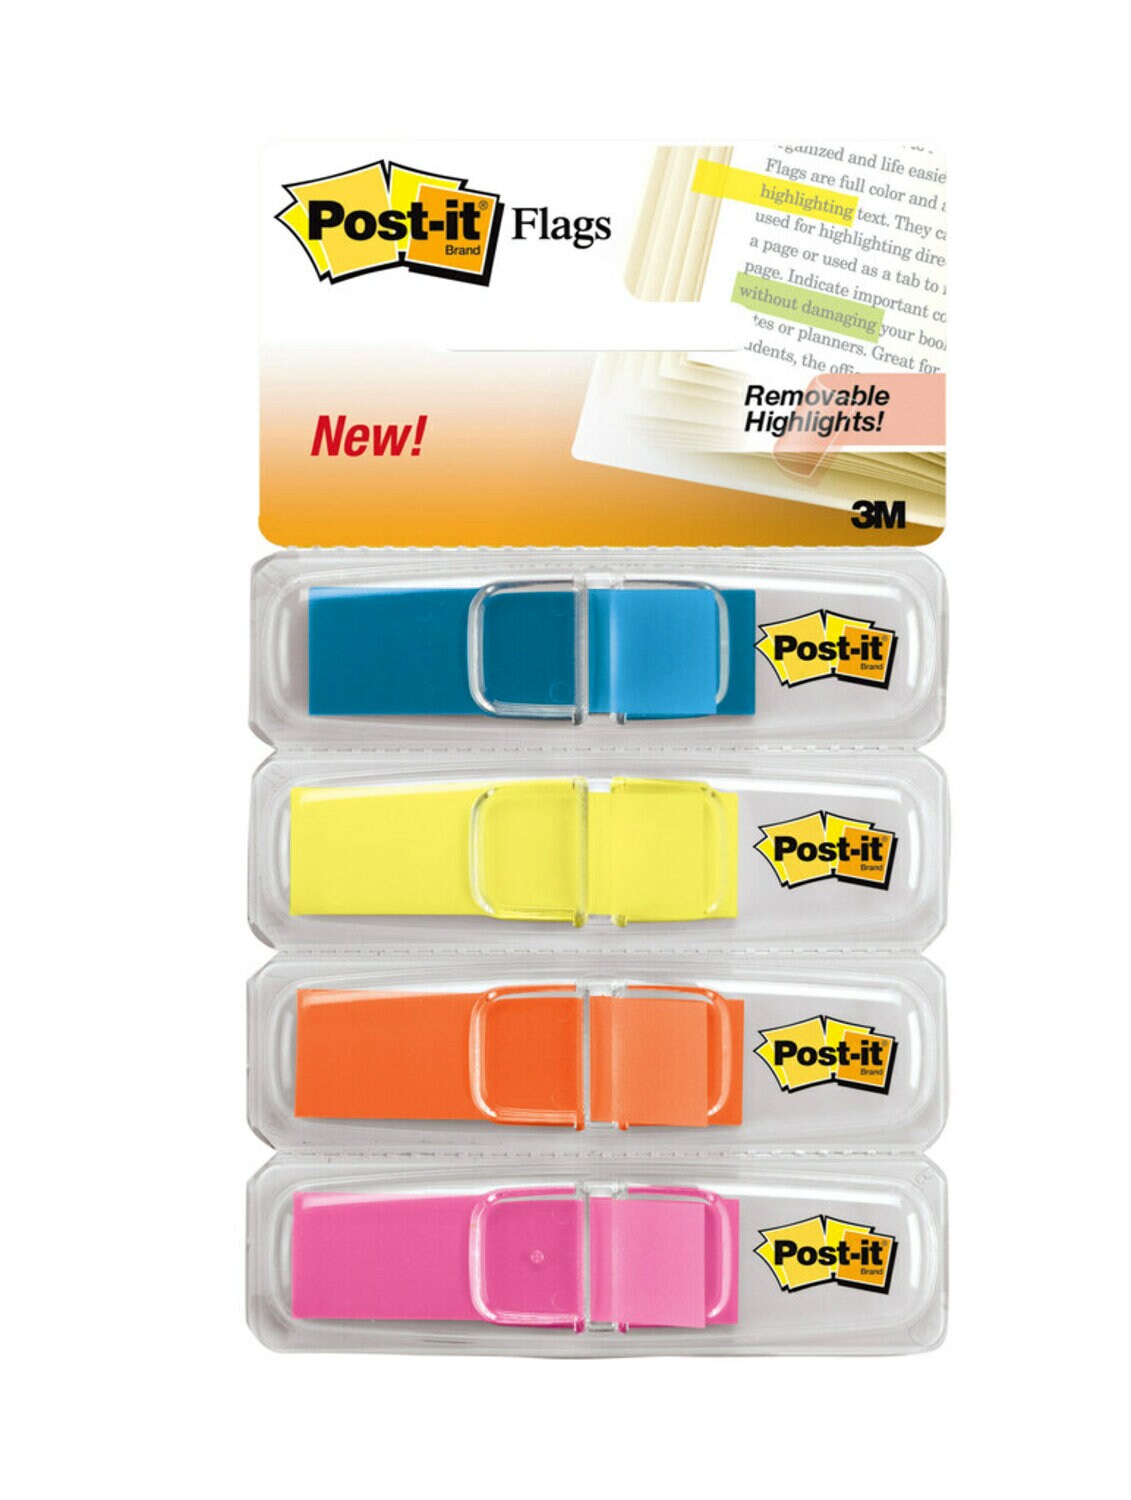 7000028735 - Post-it Flags 683-4ABX, 4 Colors, 0.47 in x 1.7 in, 6 Pack/Carton, 4 Carton/Case